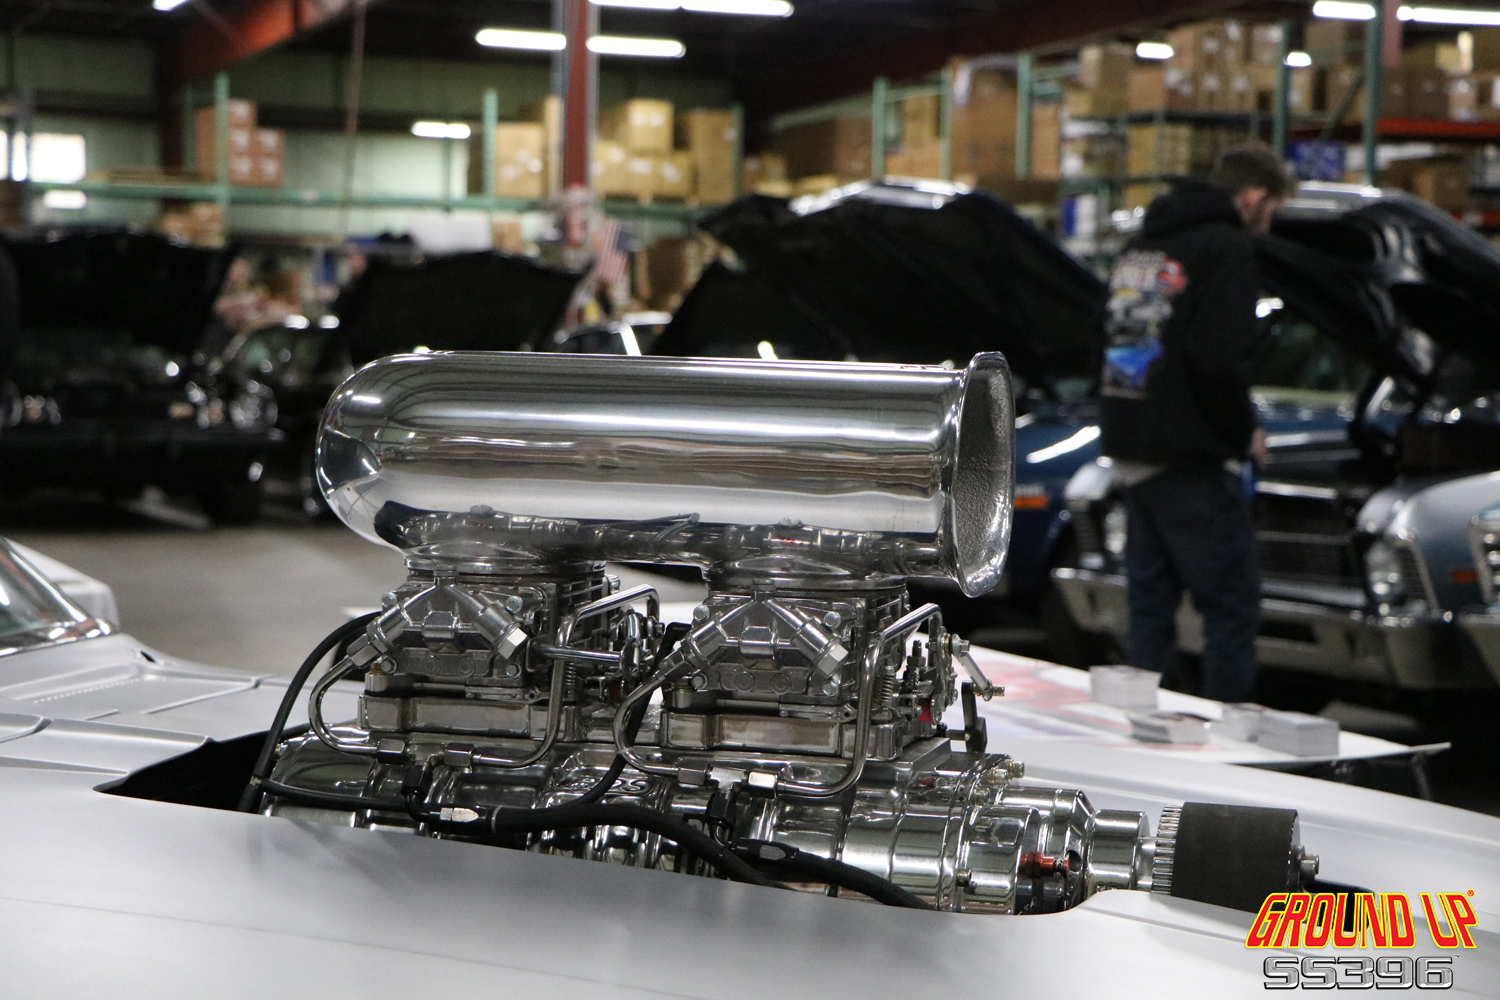 2019 Ground Up Vendor Expo - blower from 69 Camaro